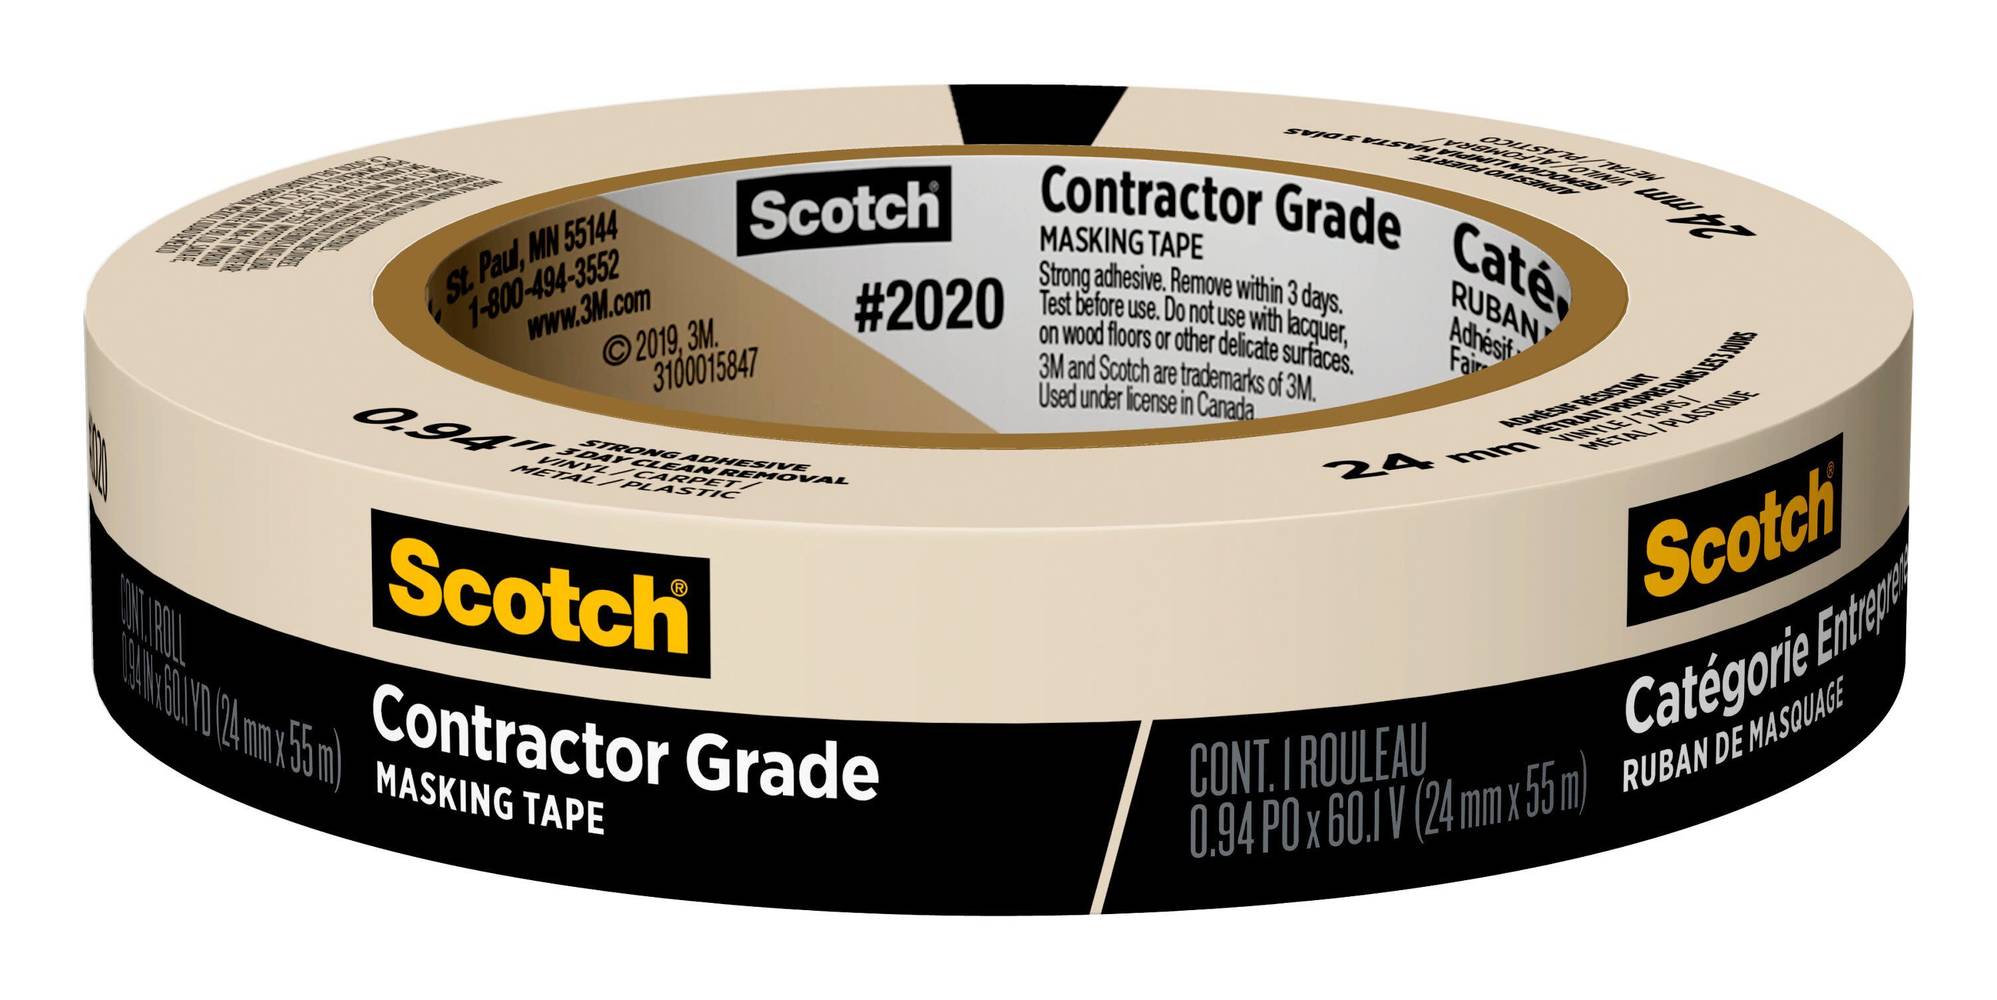 Scotch 2020 Contractor Grade 0.94-in x 60 Yard(s) Masking Tape | 2020-24AP